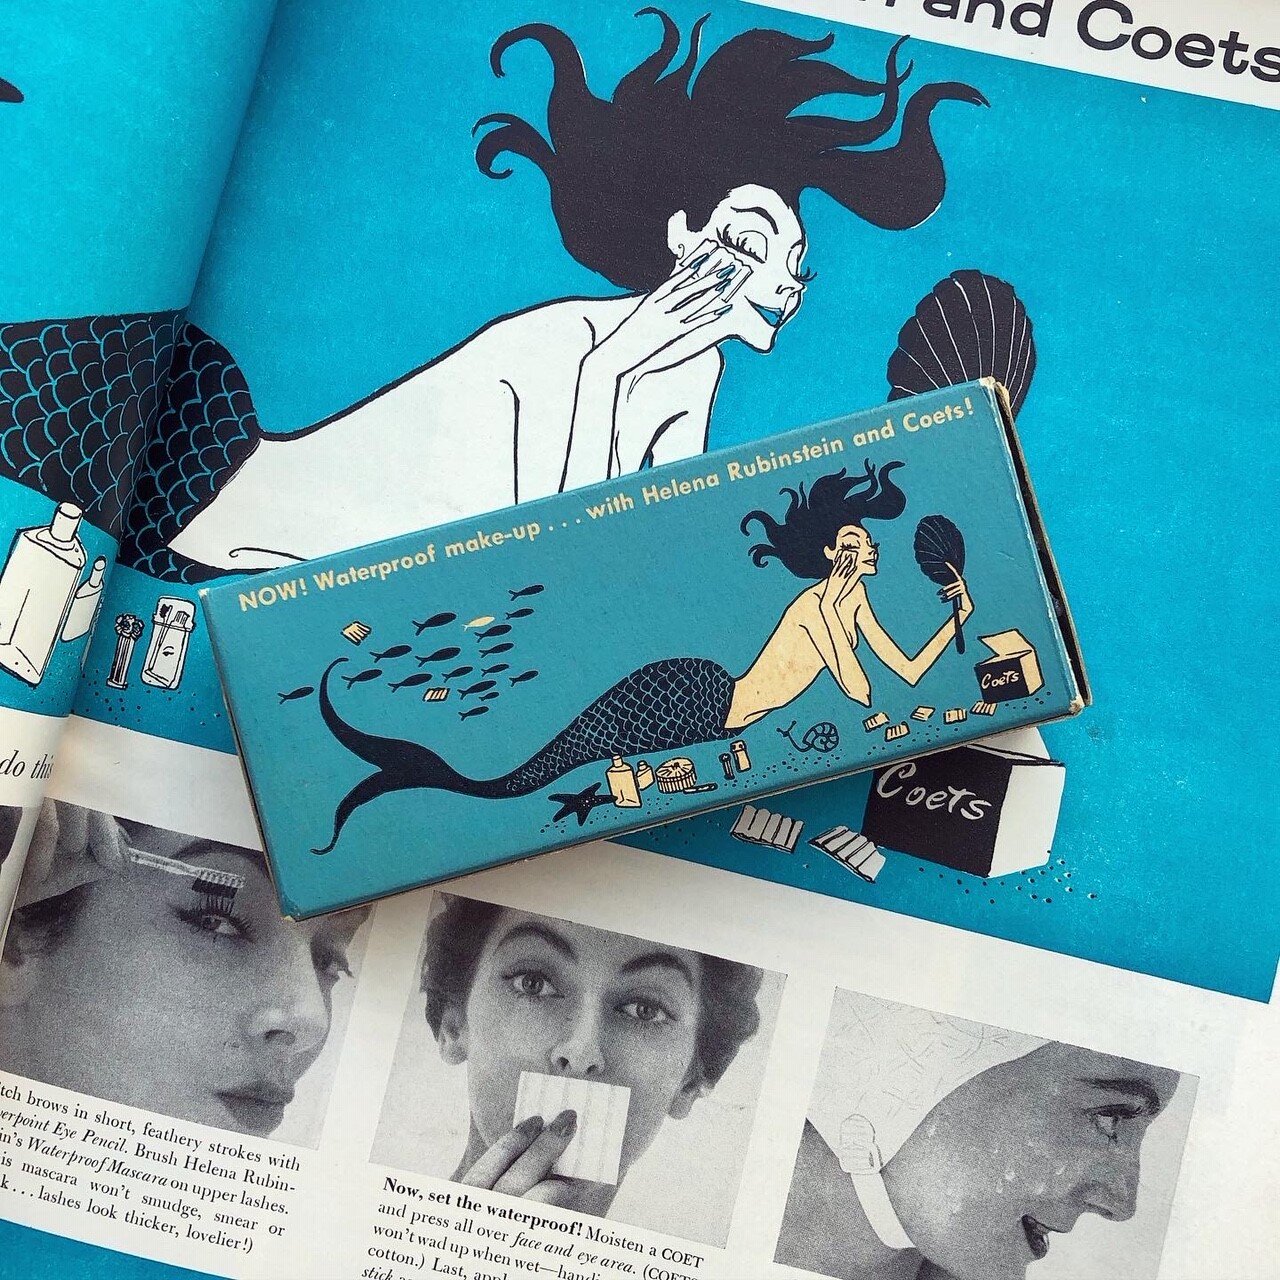   Cotton Pads Coets and Helena Rubinstein   1955   The glamourous mermaid on a box of Coets’ cotton pads and an advertorial in  Vogue  was most likely the creation of fashion illustrator Betty Brader (1923-1986). Brader was best known for her adverti